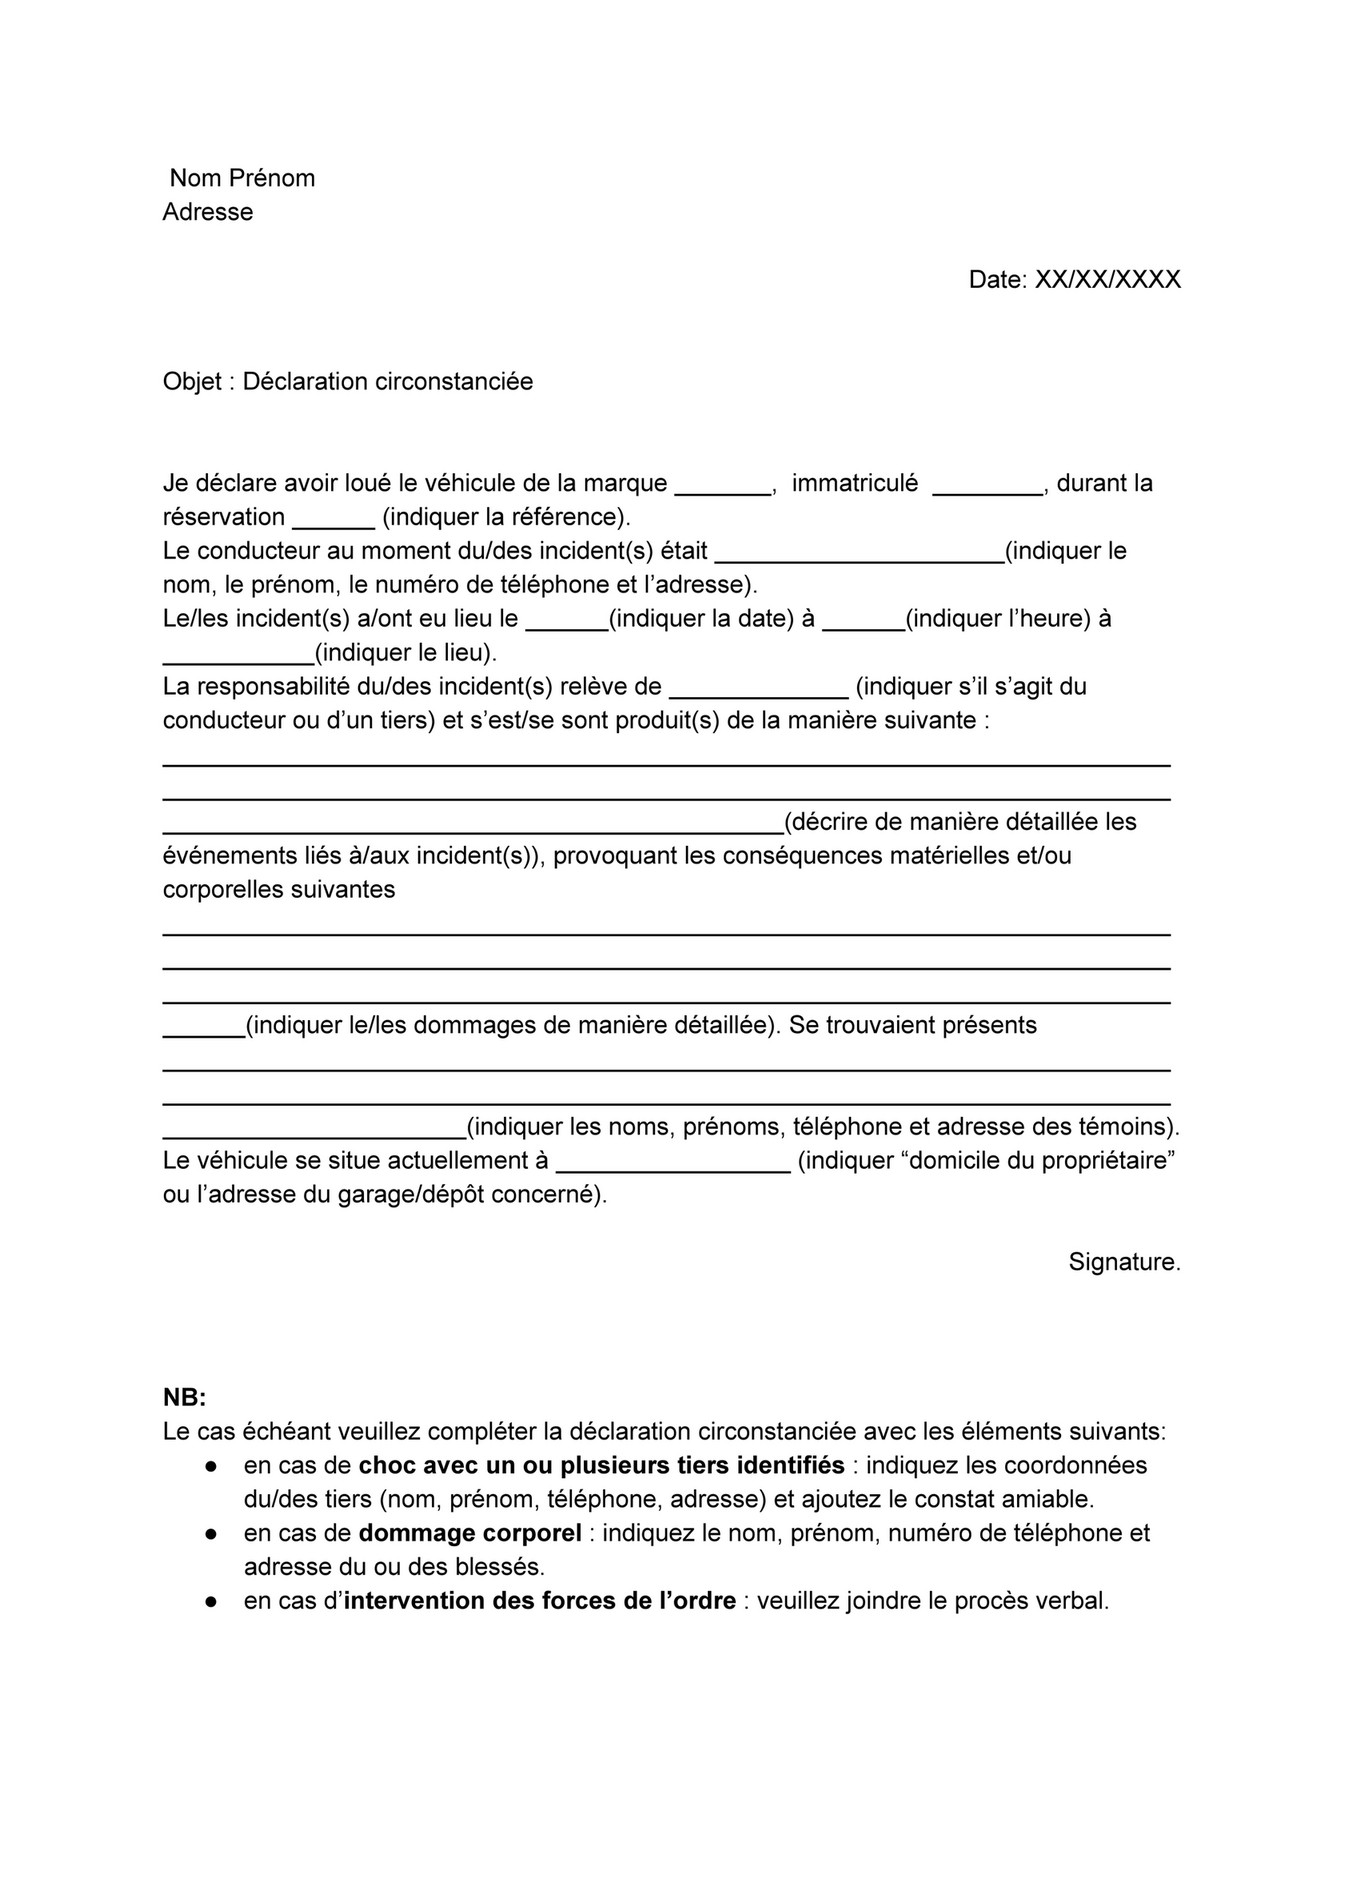 My publications - Déclaration circonstanciée - Page 1 - Created with ...